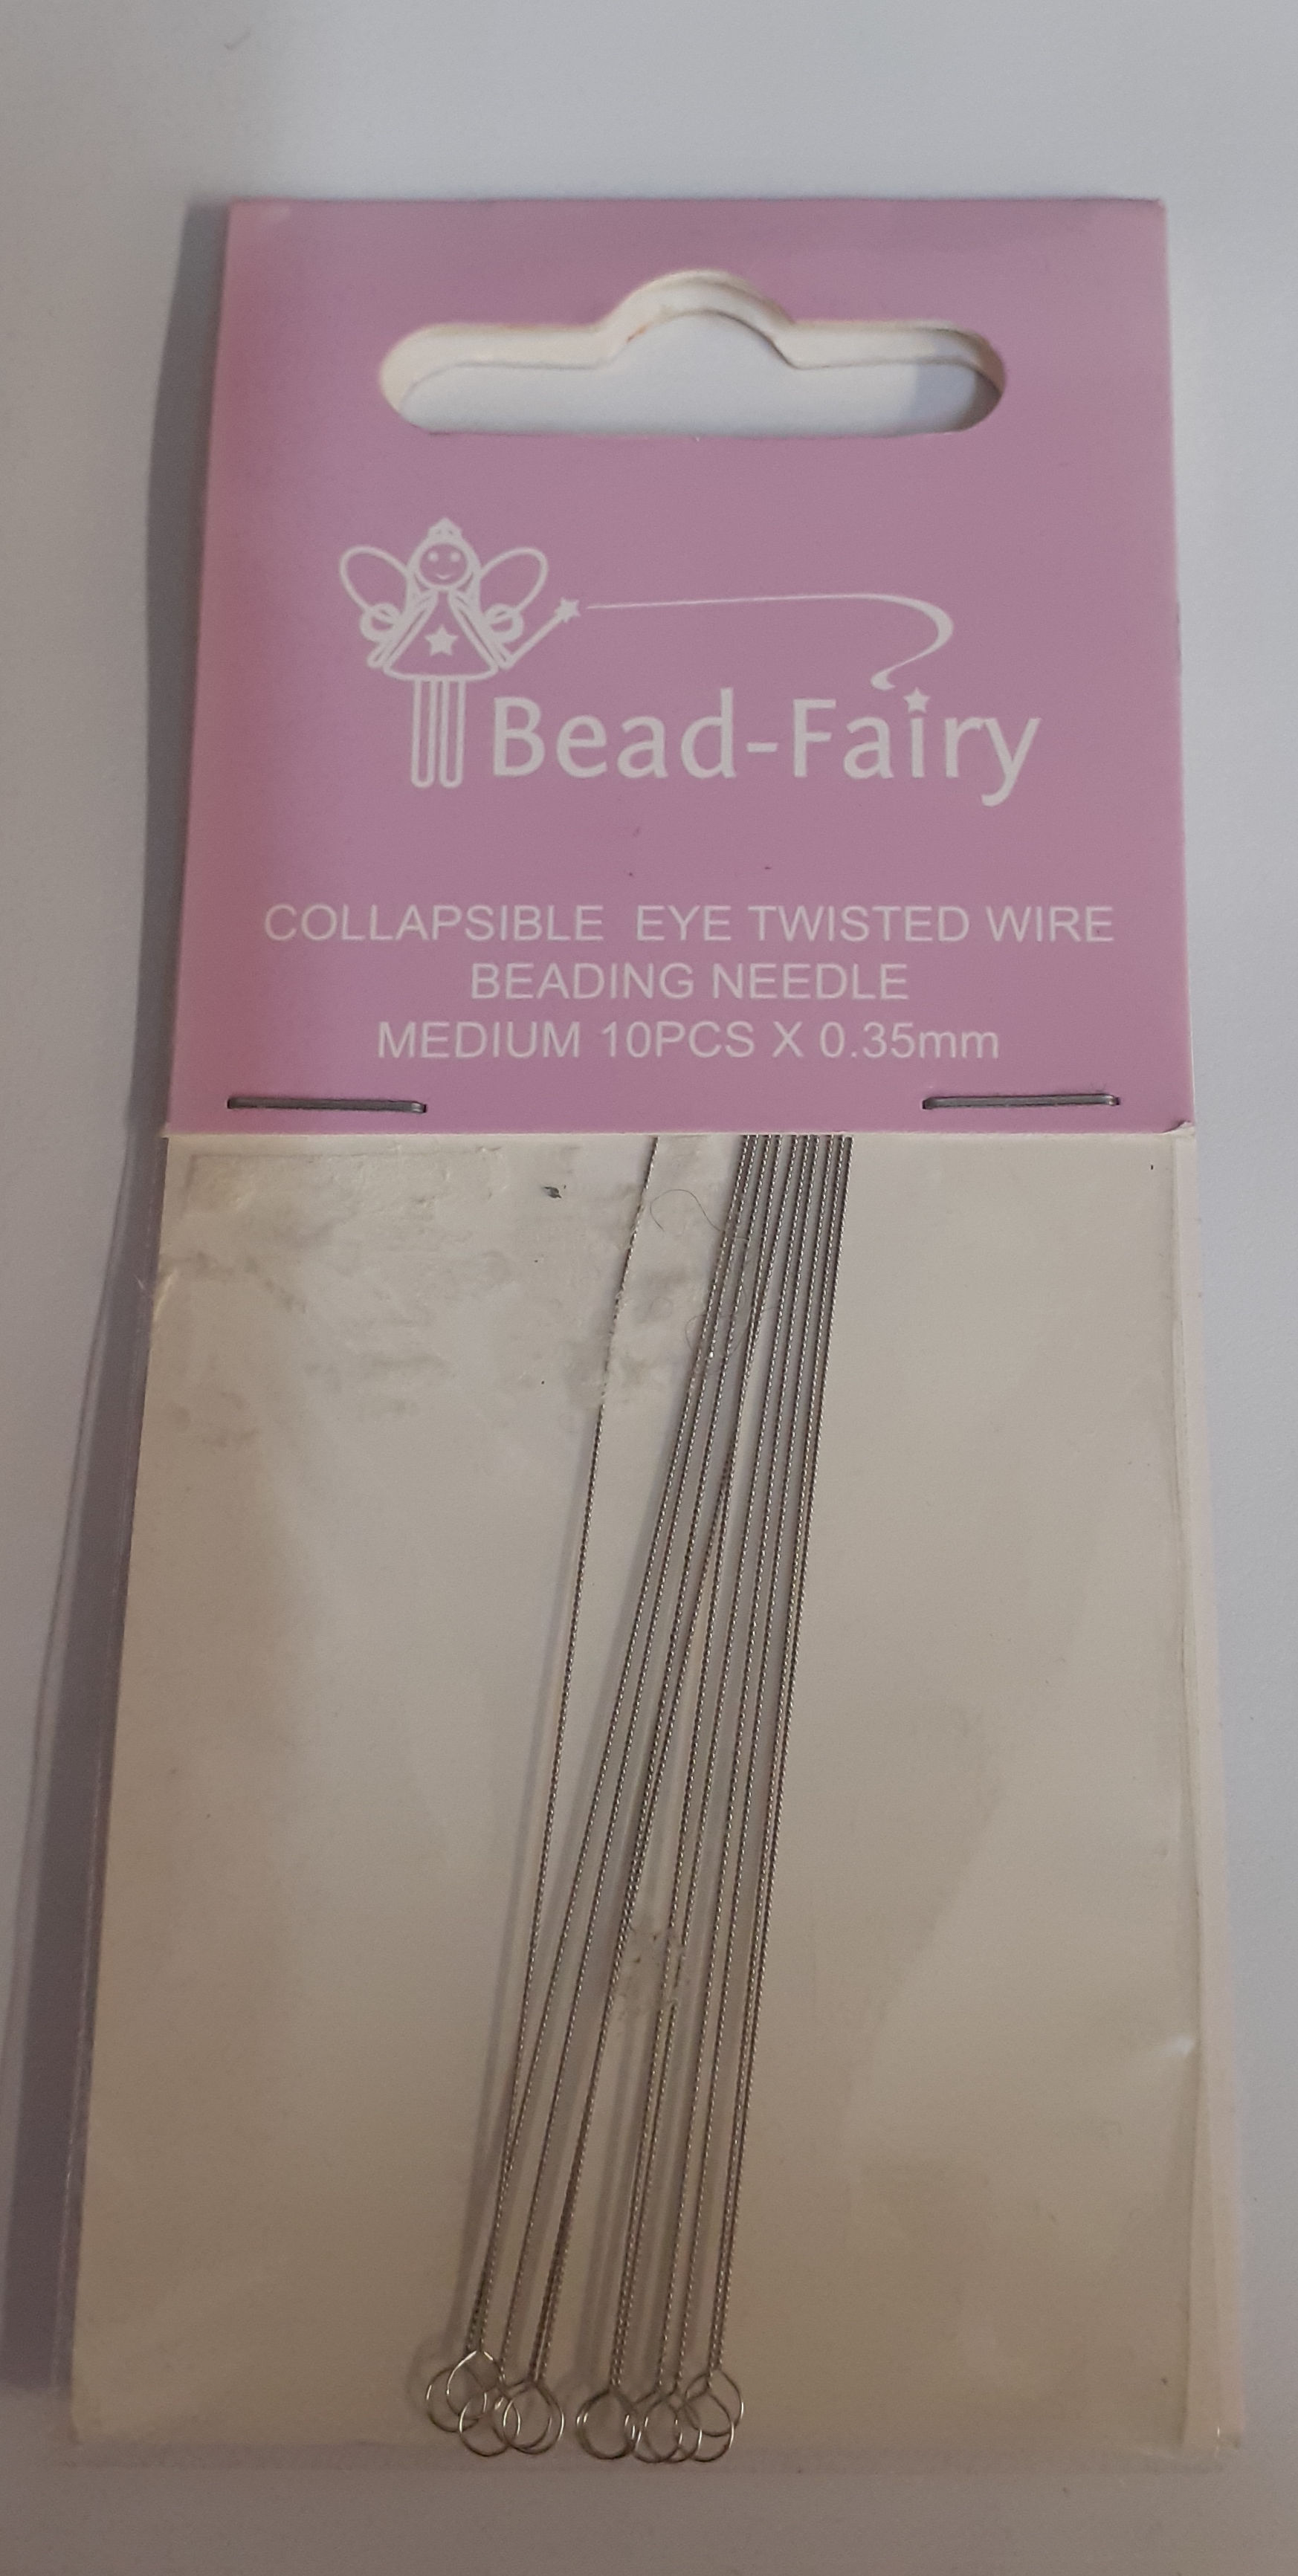 Size Medium : Beading Collapsible Eye Twisted Wire :10 Pieces  by Bead Fairy